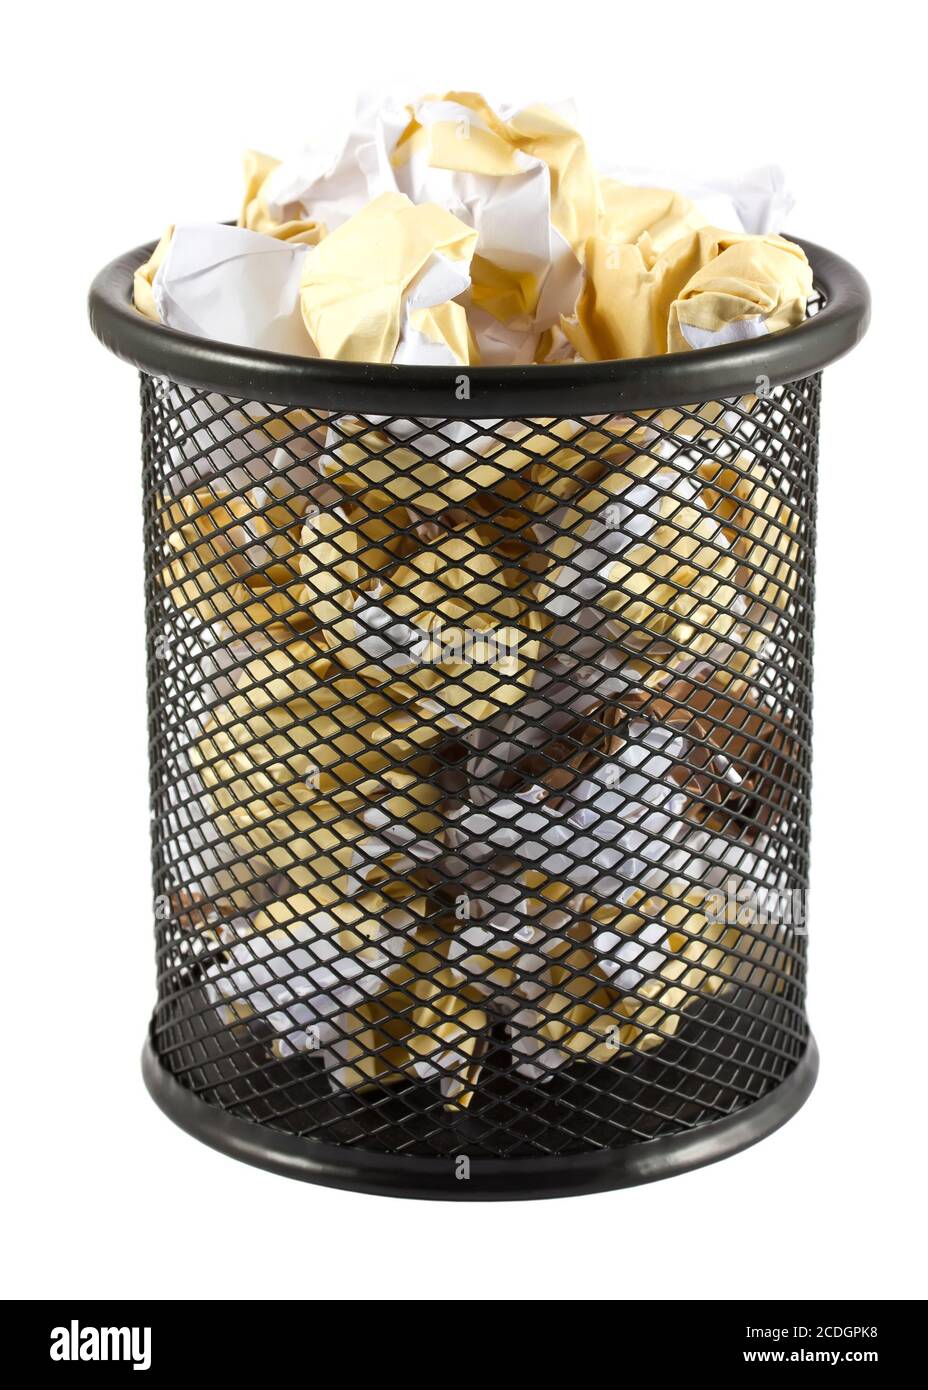 Garbage bin with crumpled paper Stock Photo